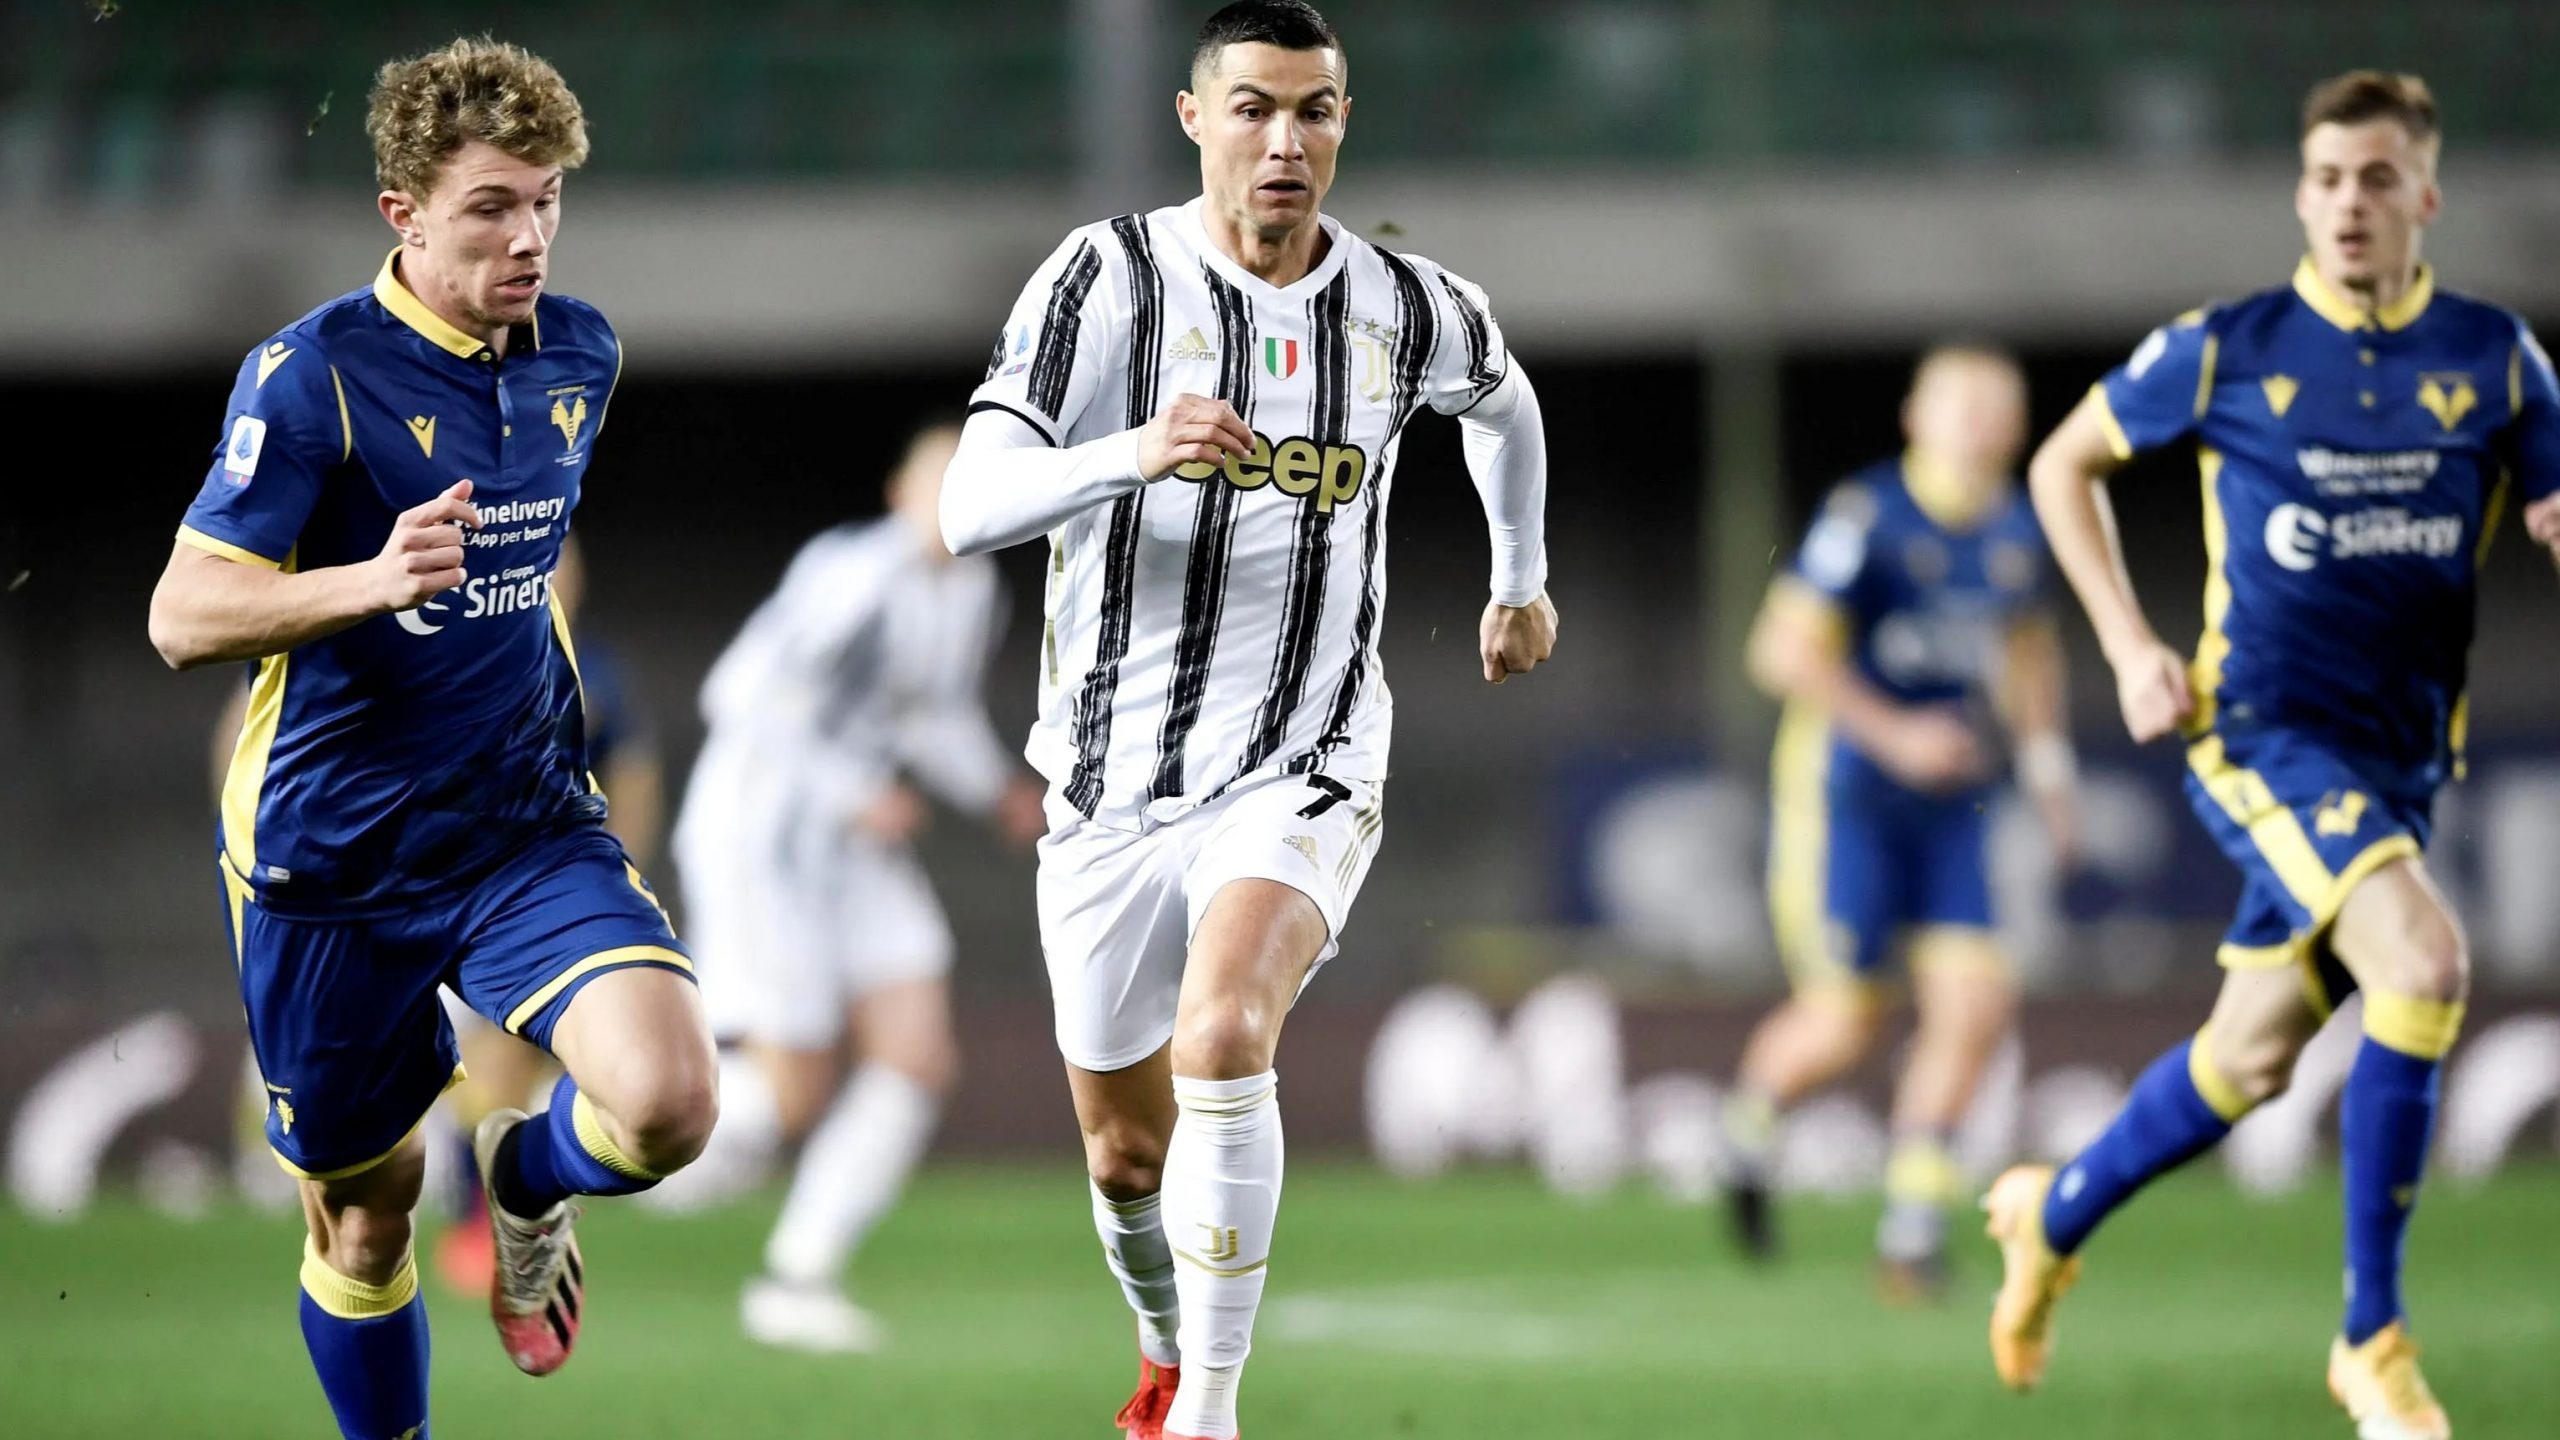 Lone goal from Cristiano Ronaldo salvages draw for Juventus in Verona